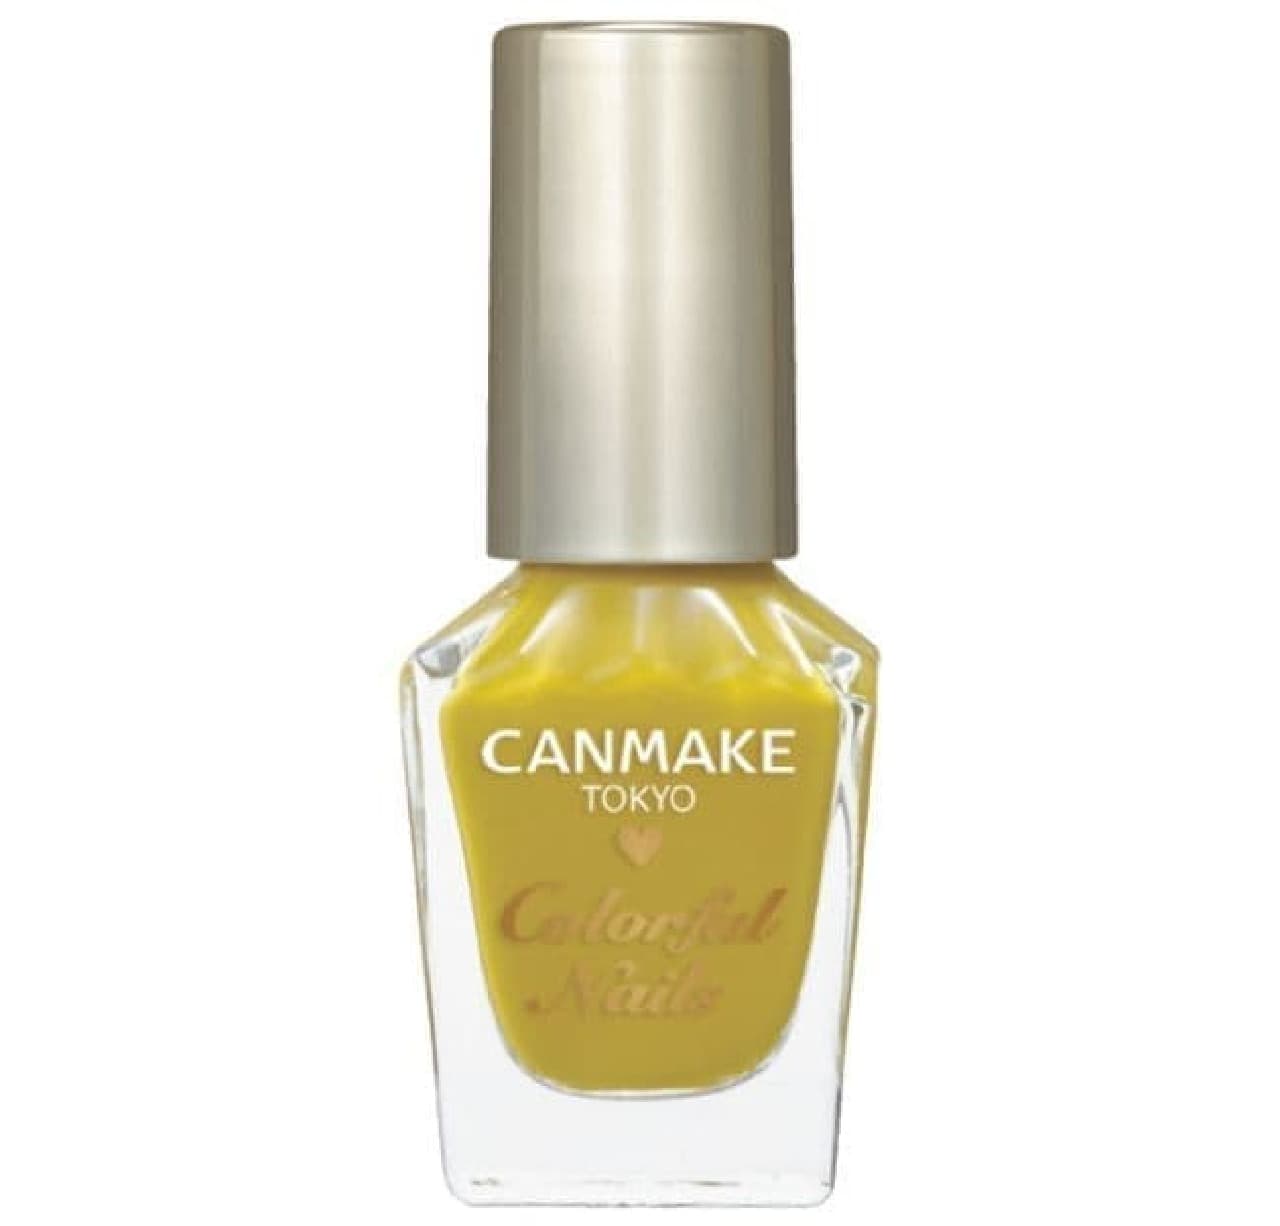 Canmake "Colorful Nails" Limited Color "N58 Pistachio Yellow"